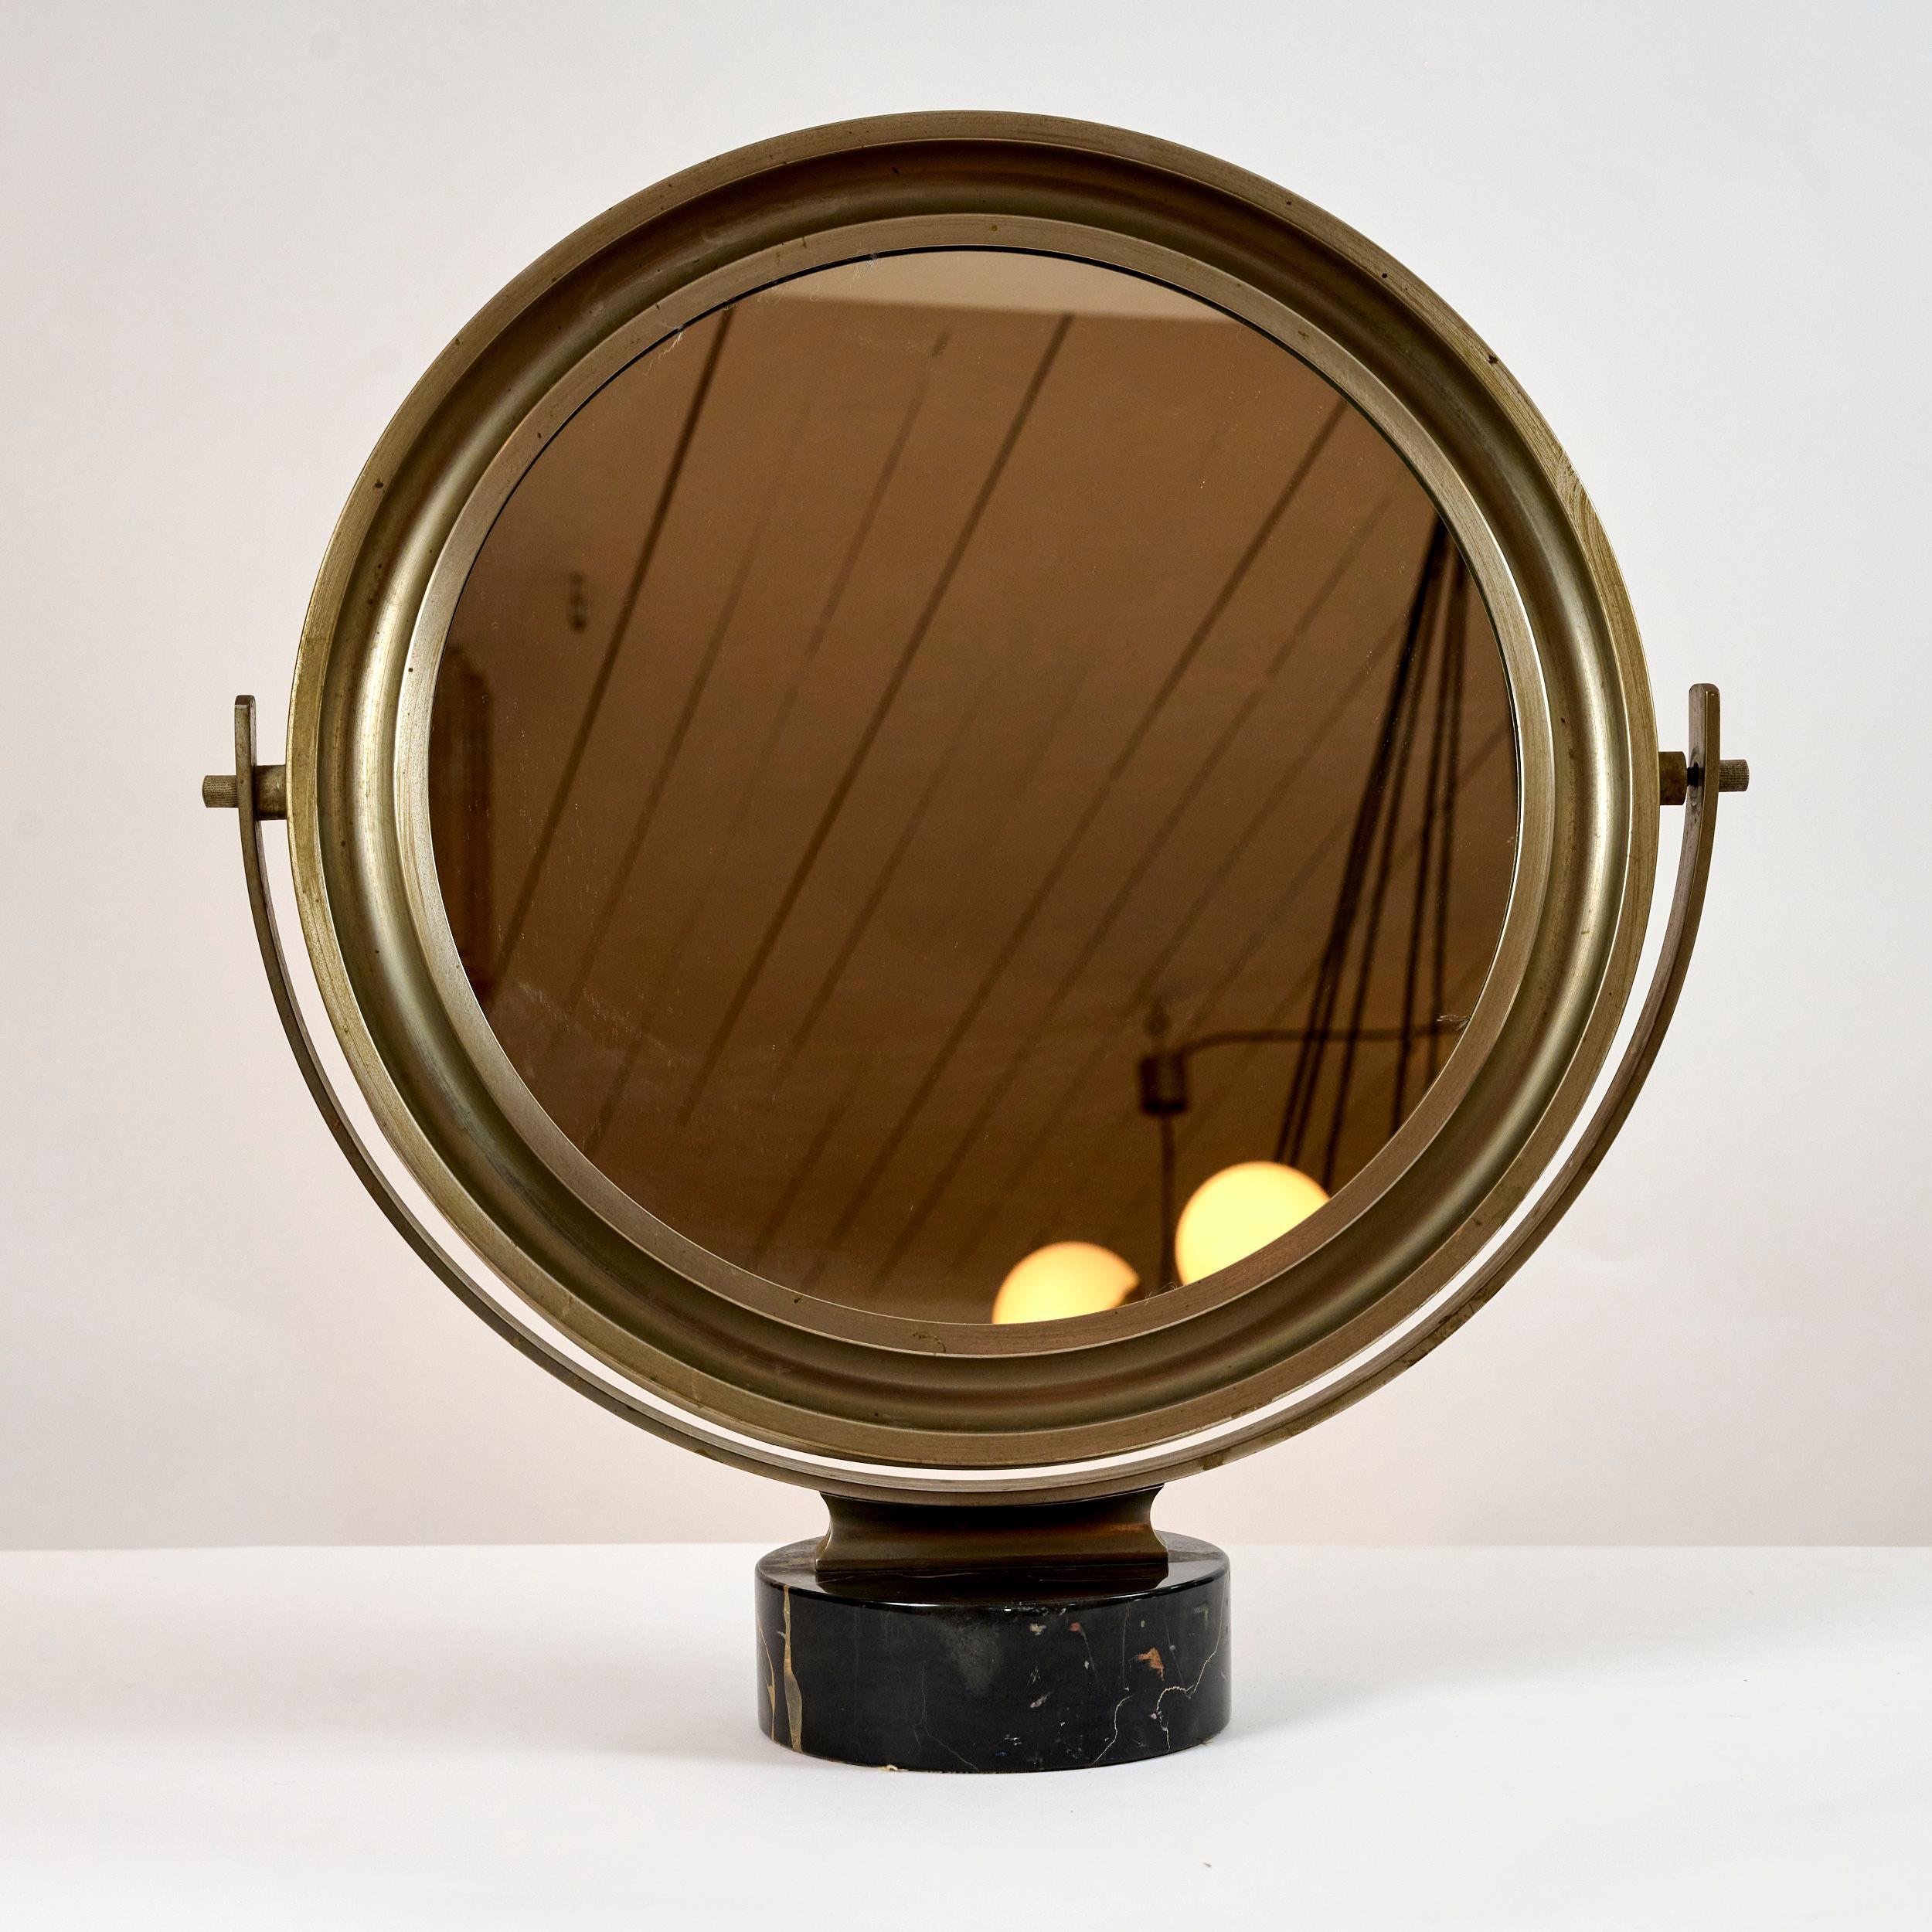 Sergio Mazza 'Narcisso' table mirror. Italy c1960.

Nickel frame with articulated mirror on black marble base.

Patina to frame. Marble in very good condition. No chips or nicks.

 